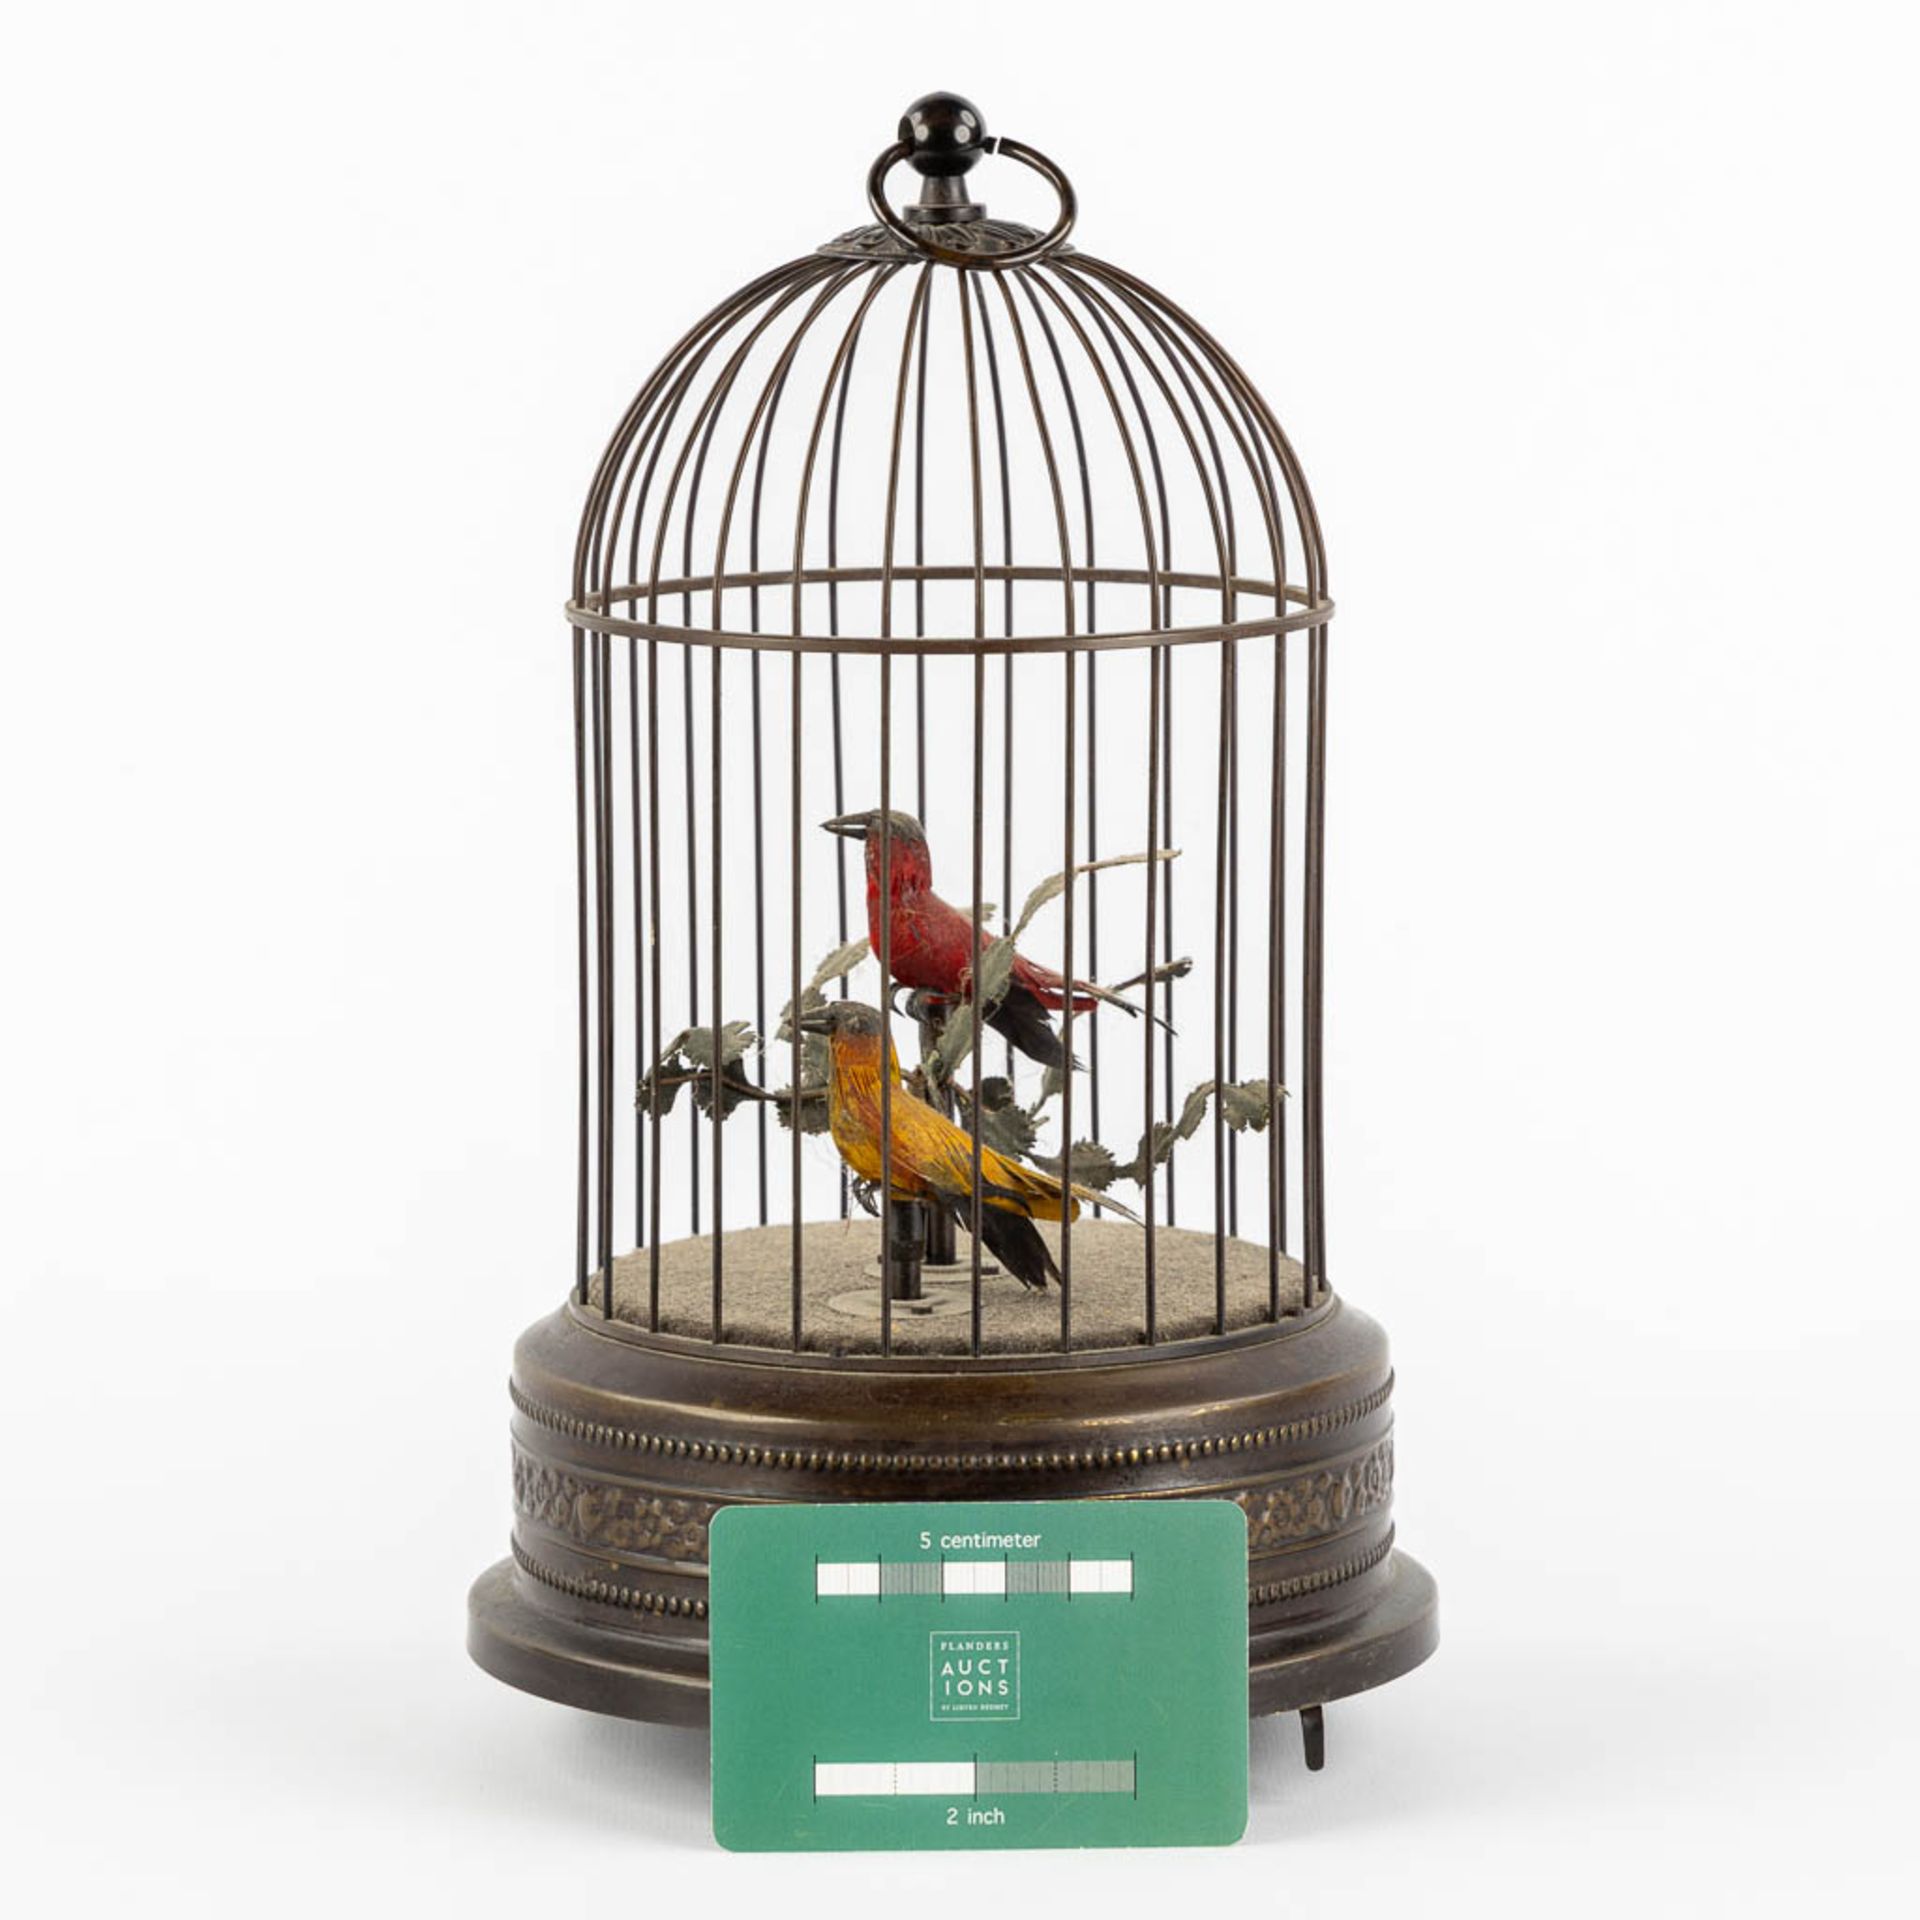 A brass bird-cage automata with two singing birds. (H:28 x D:16 cm) - Image 2 of 9